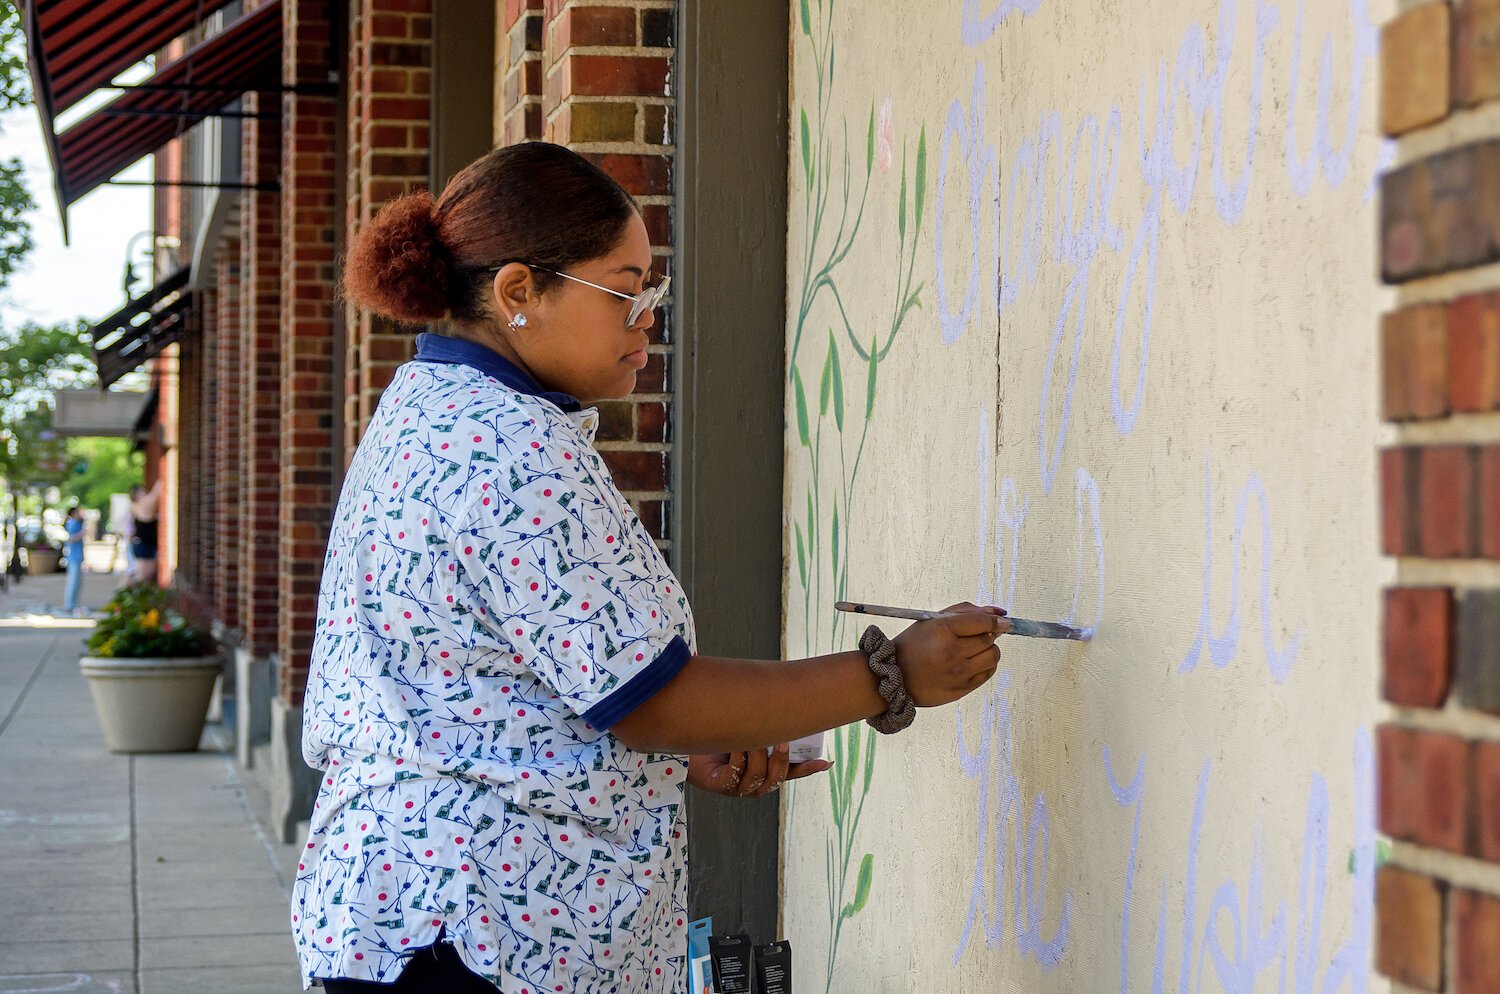 Isis Shaw paints a mural on Visit Fort Wayne's windows in downtown Fort Wayne.